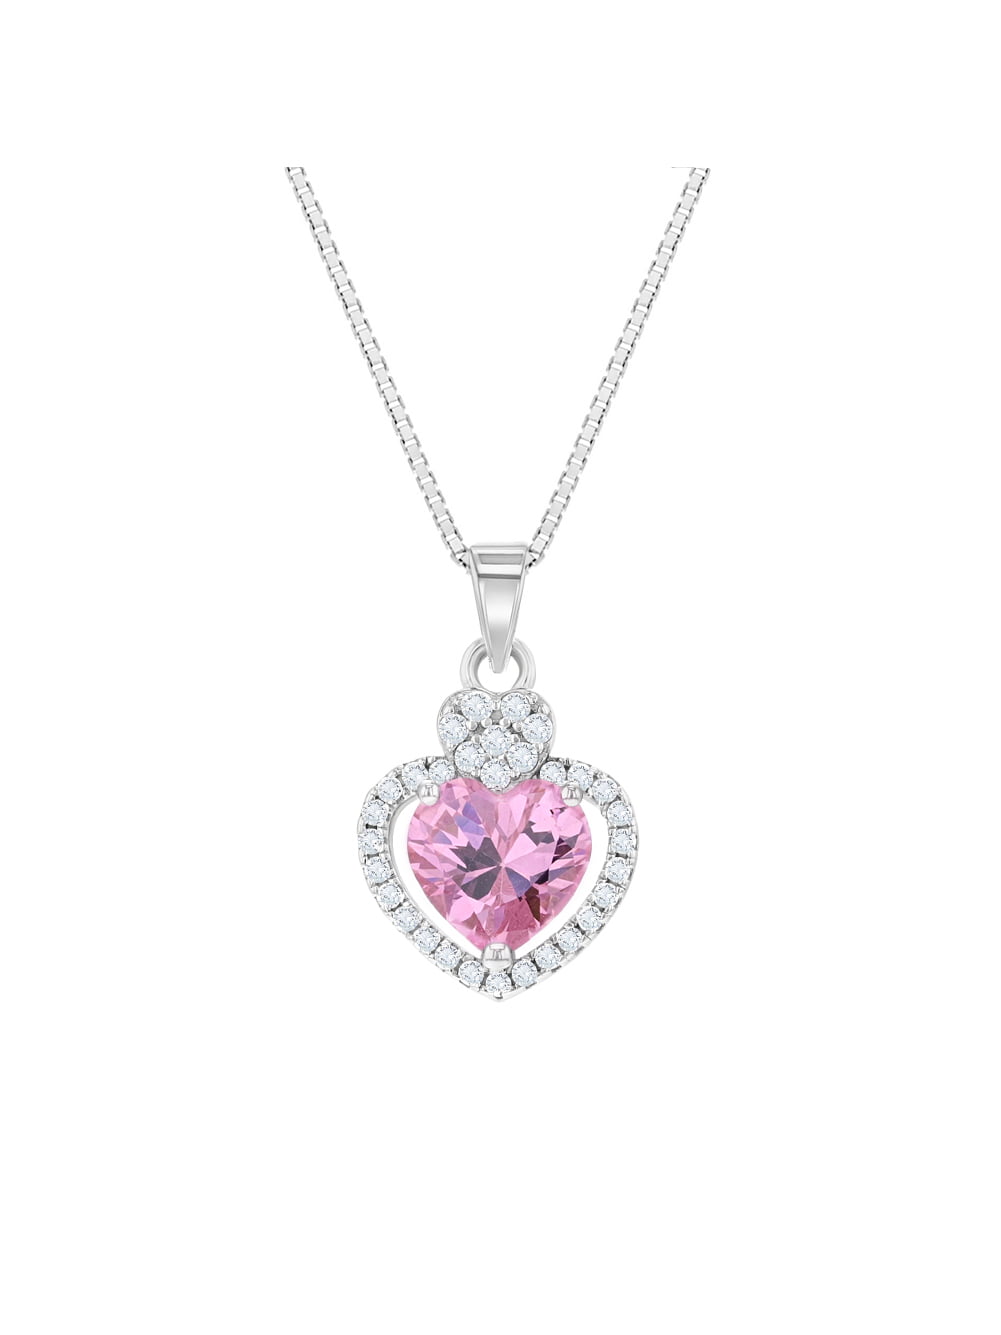 925 Sterling Silver Clear Cubic Zirconia Heart Enhancer Pendant